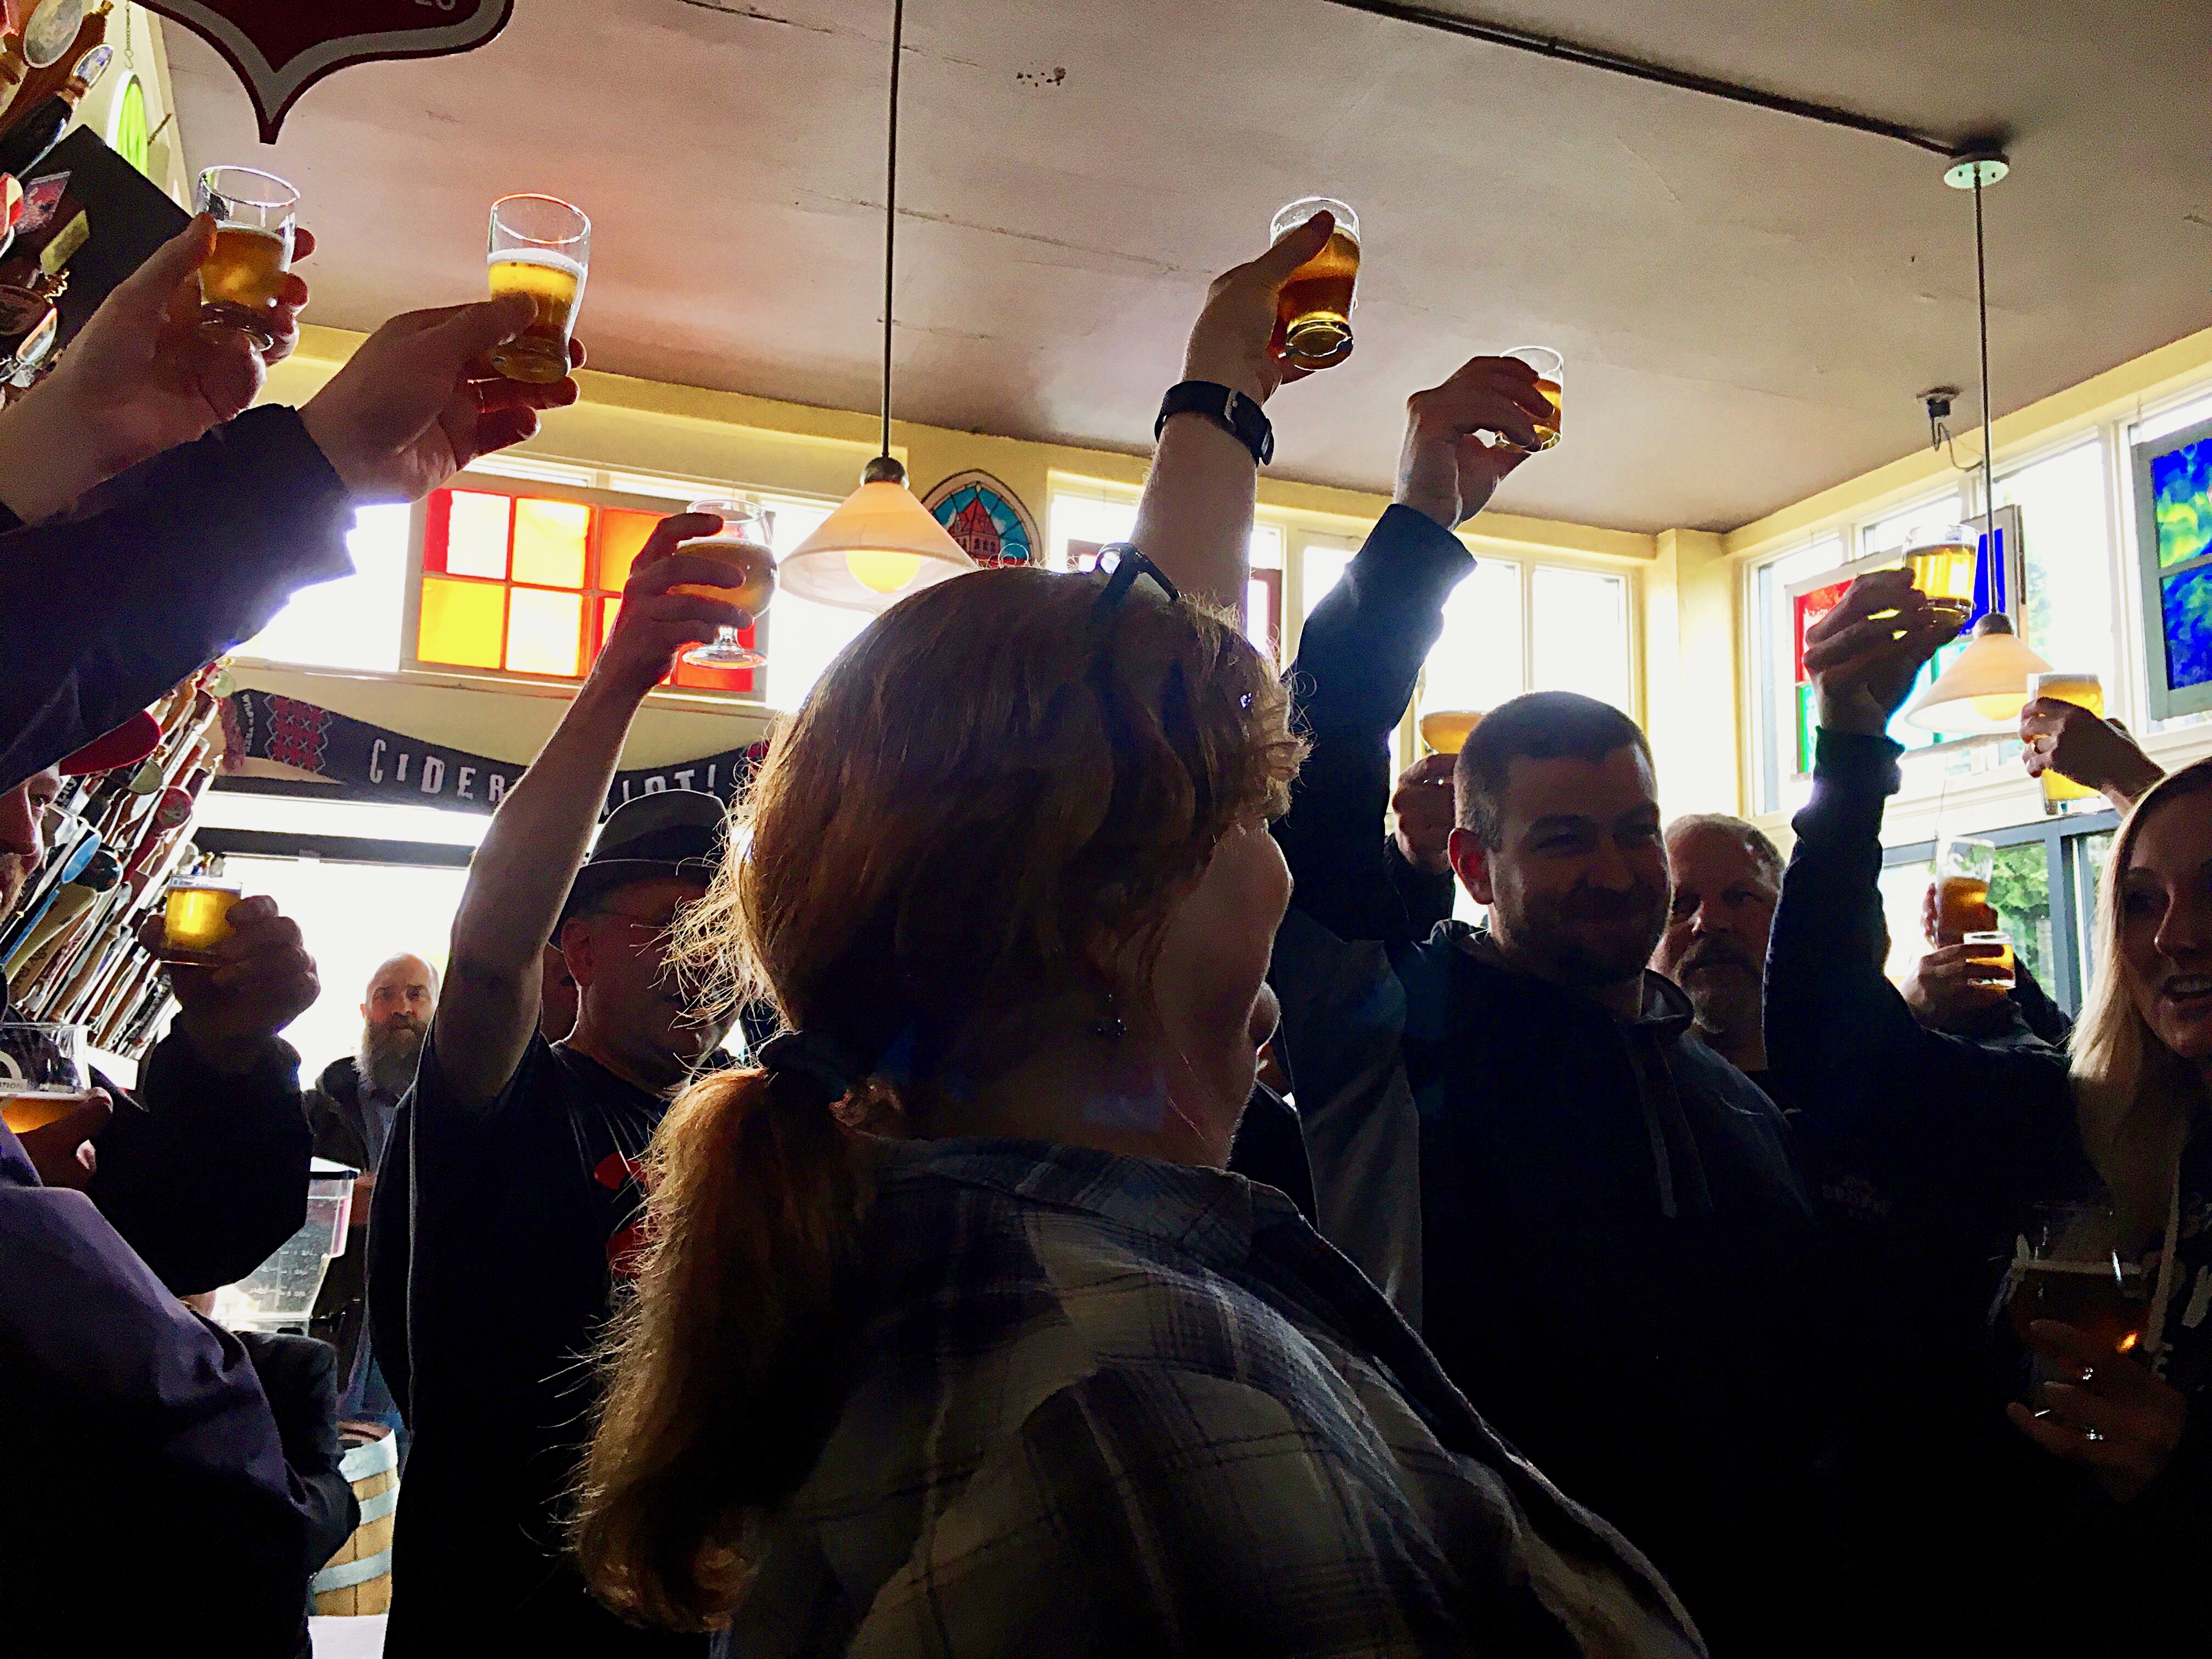 A toast to Belmont Station's 20th Anniversary